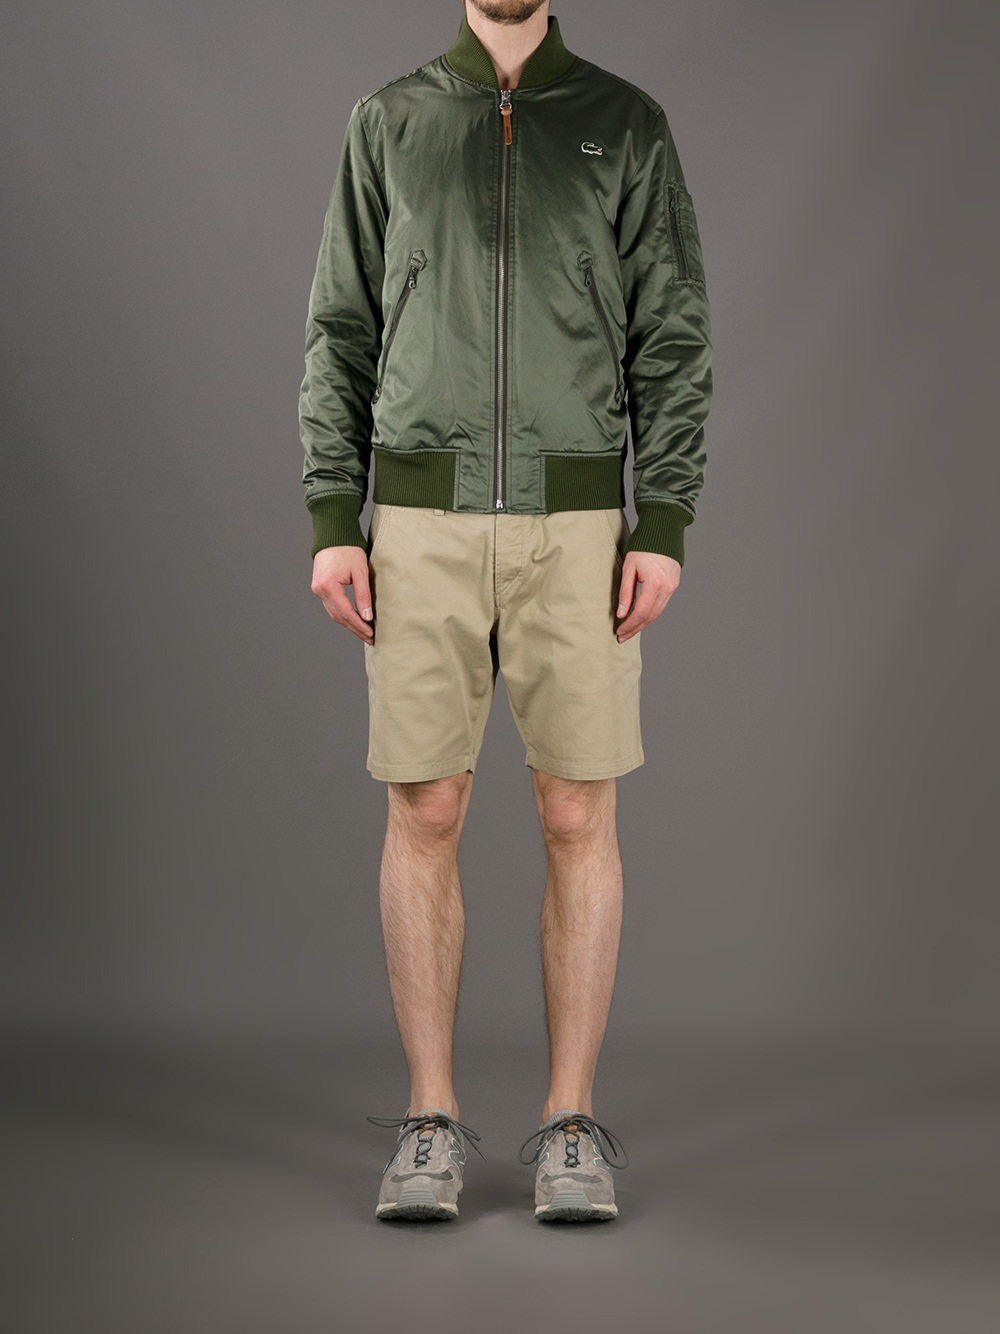 Lacoste L!ive Bomber Jacket in Green 